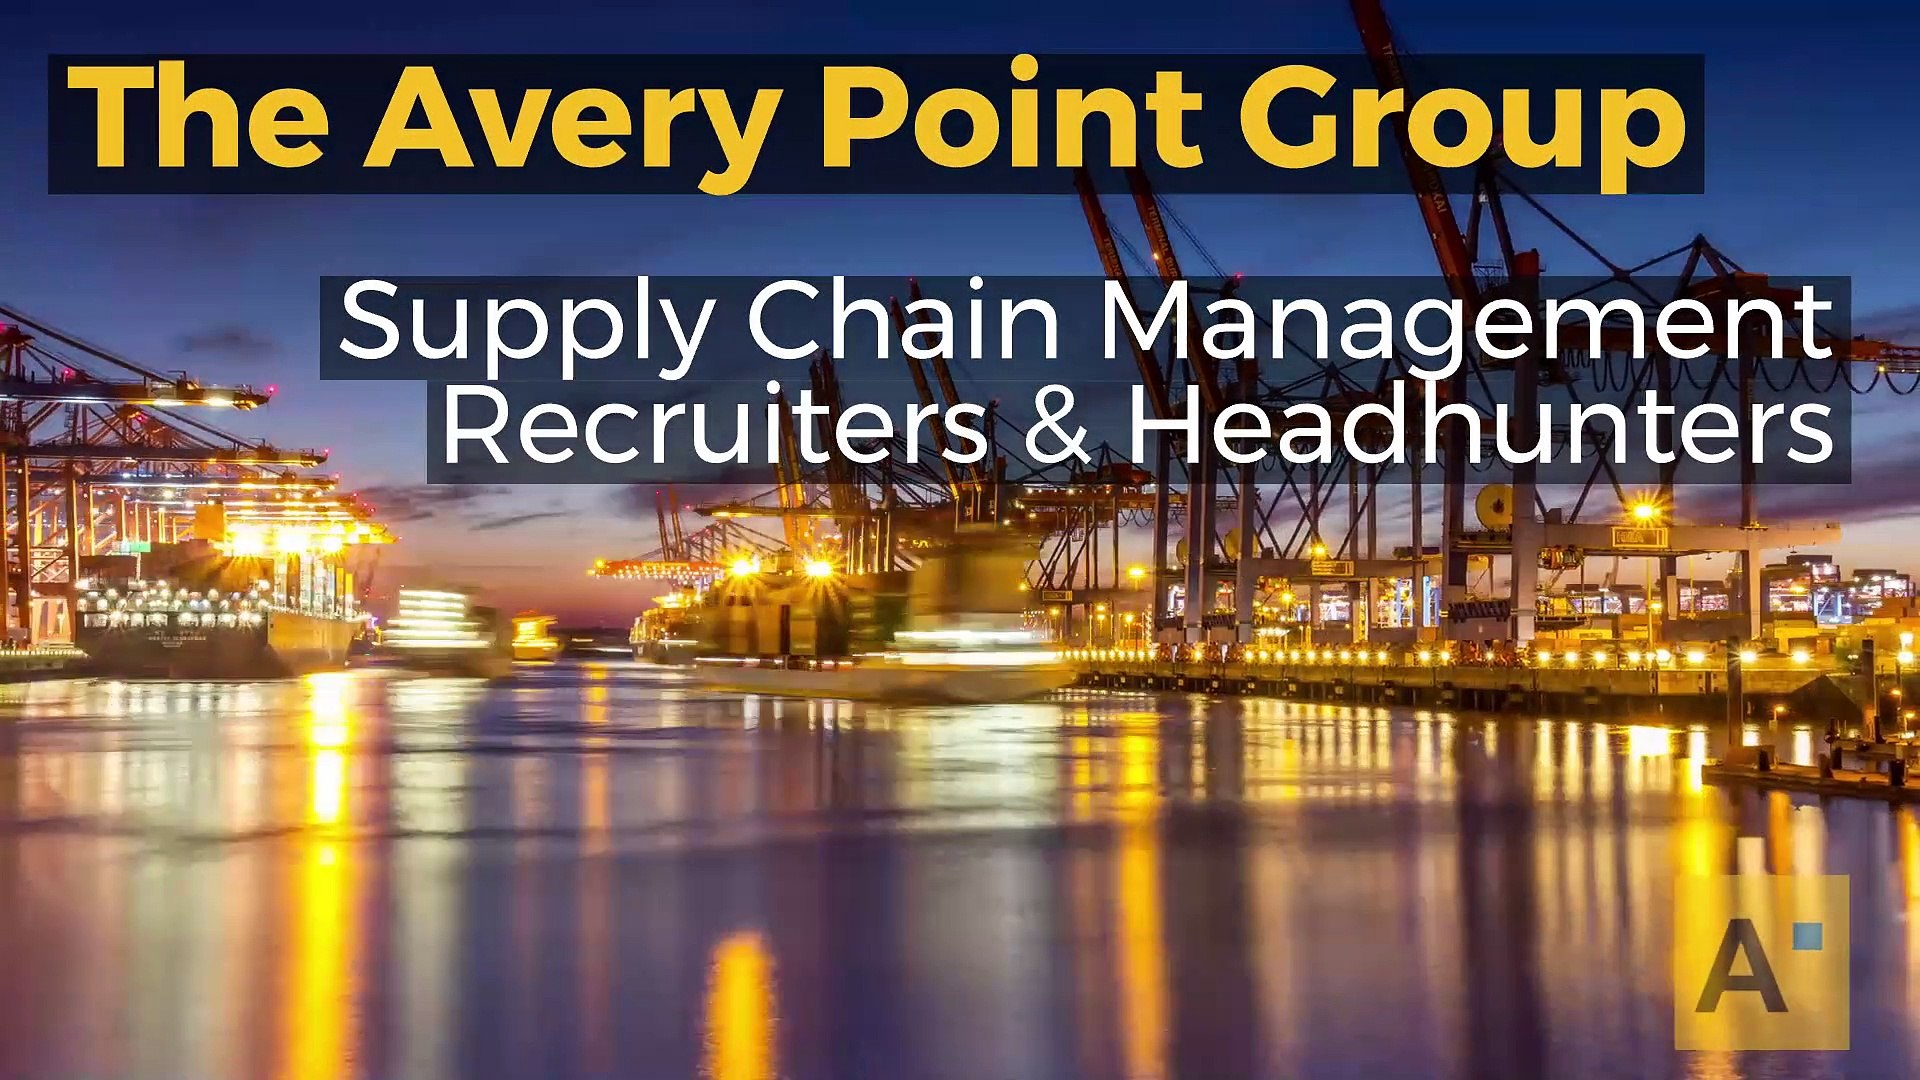 Nationwide Supply Chain Recruiter - The Avery Point Group - video  Dailymotion